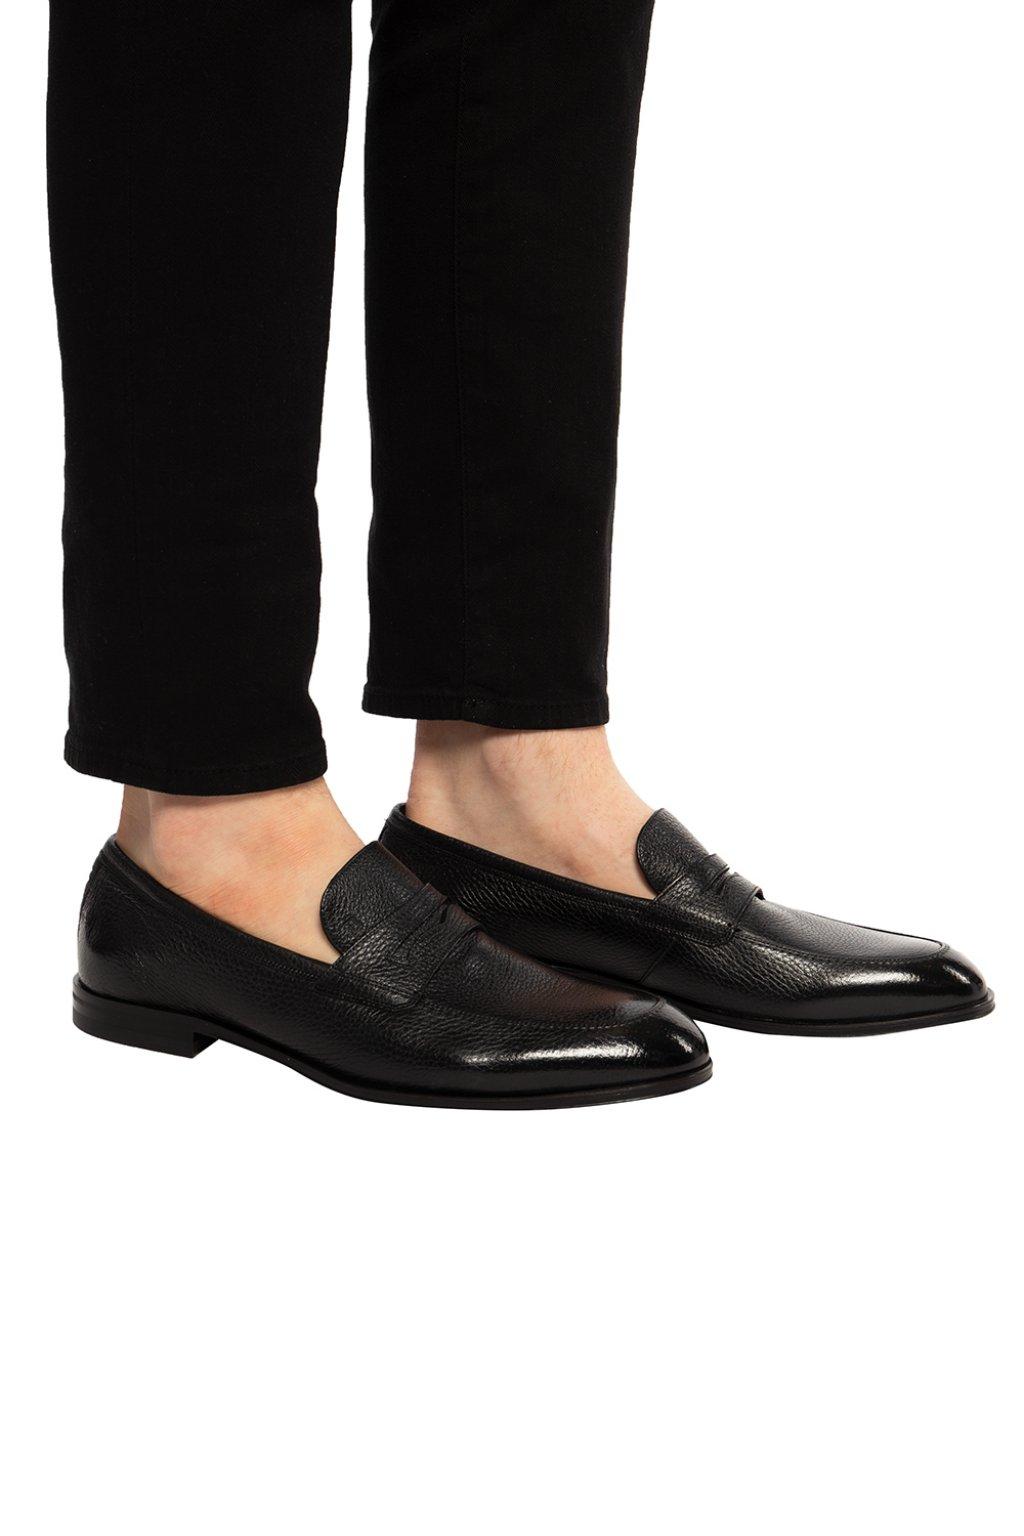 Bally Leather 'webb' Loafers in Black for Men - Save 44% | Lyst